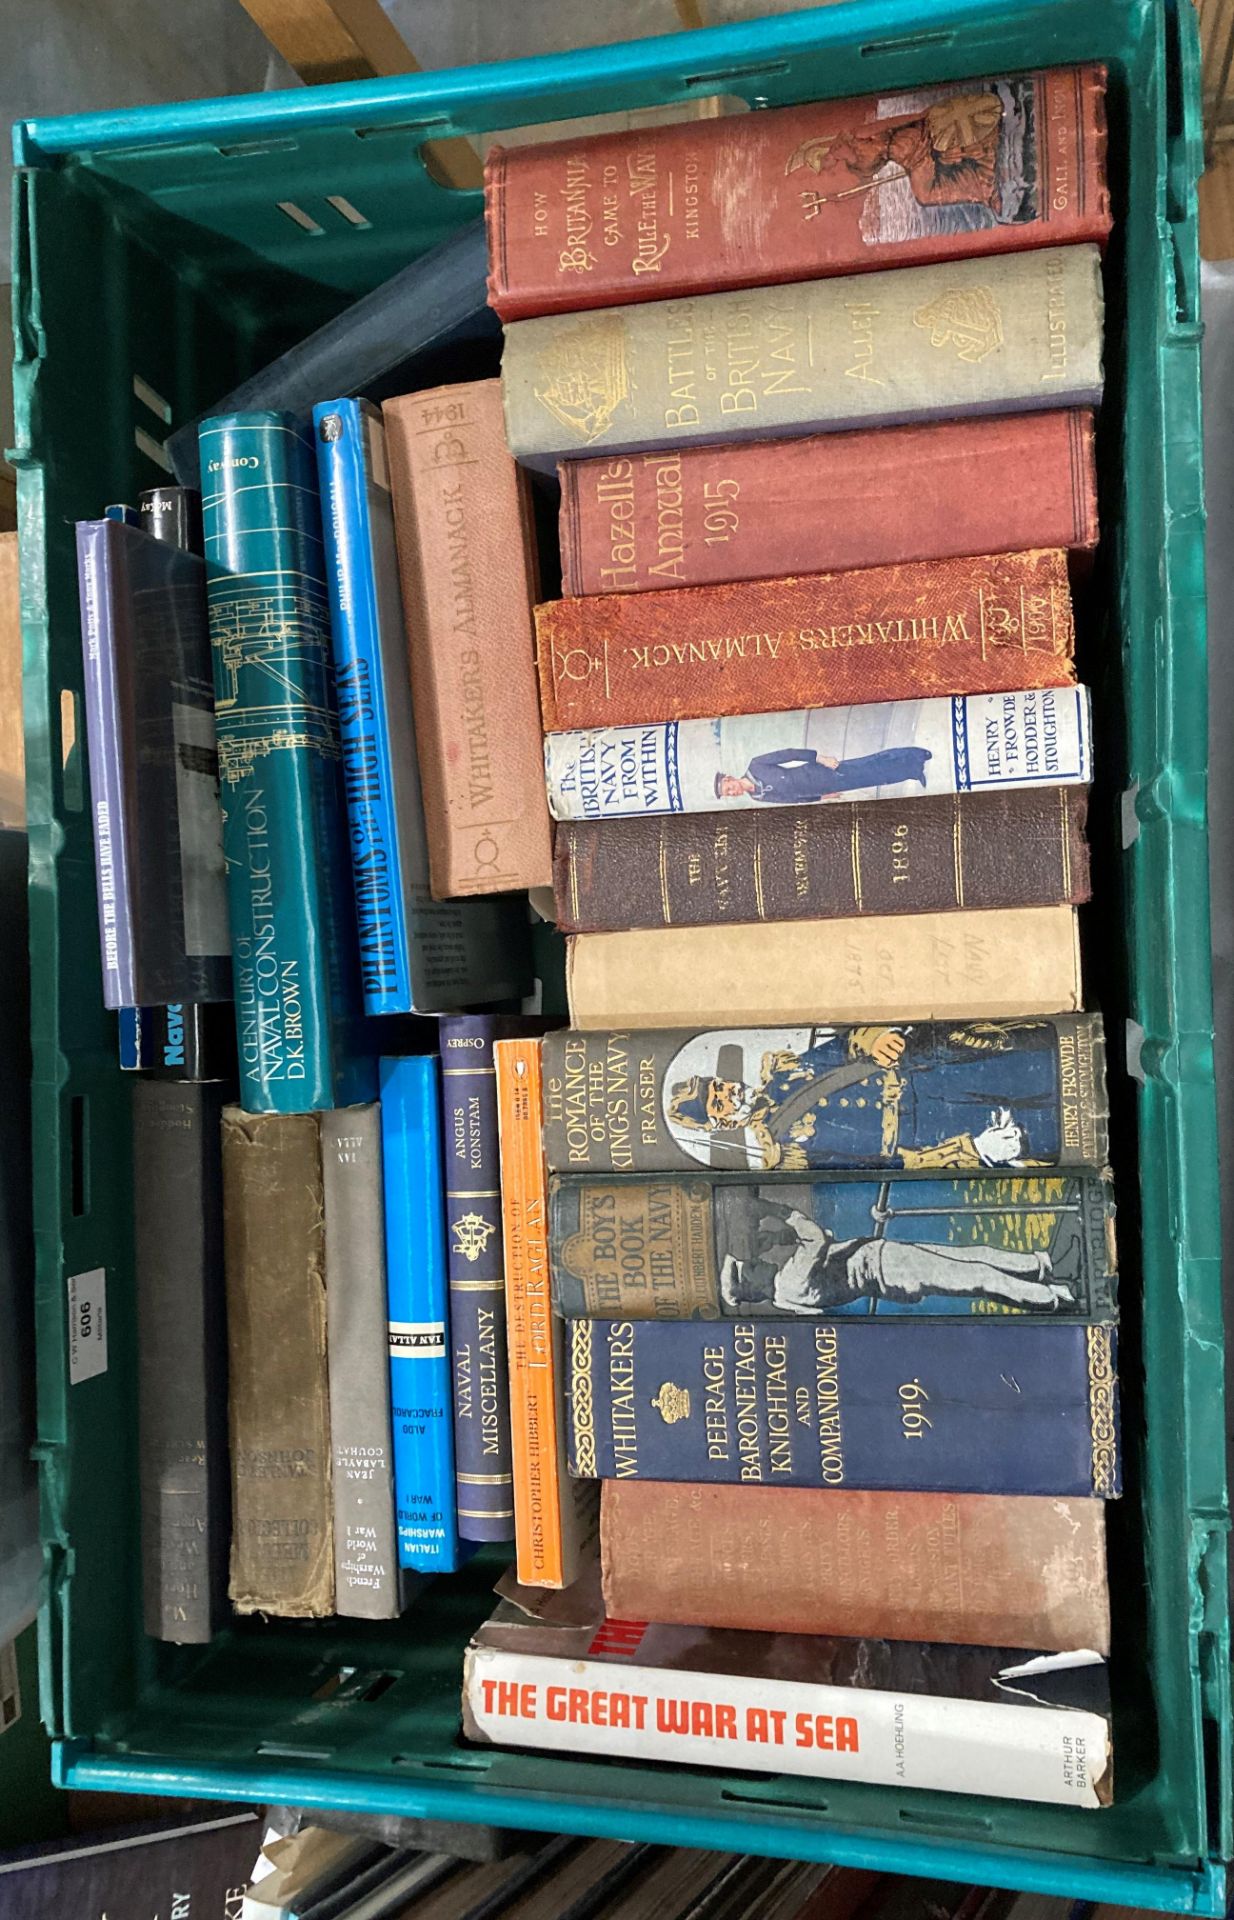 Contents to green crate - 23 assorted books mainly maritime and naval related but also Whitikar's